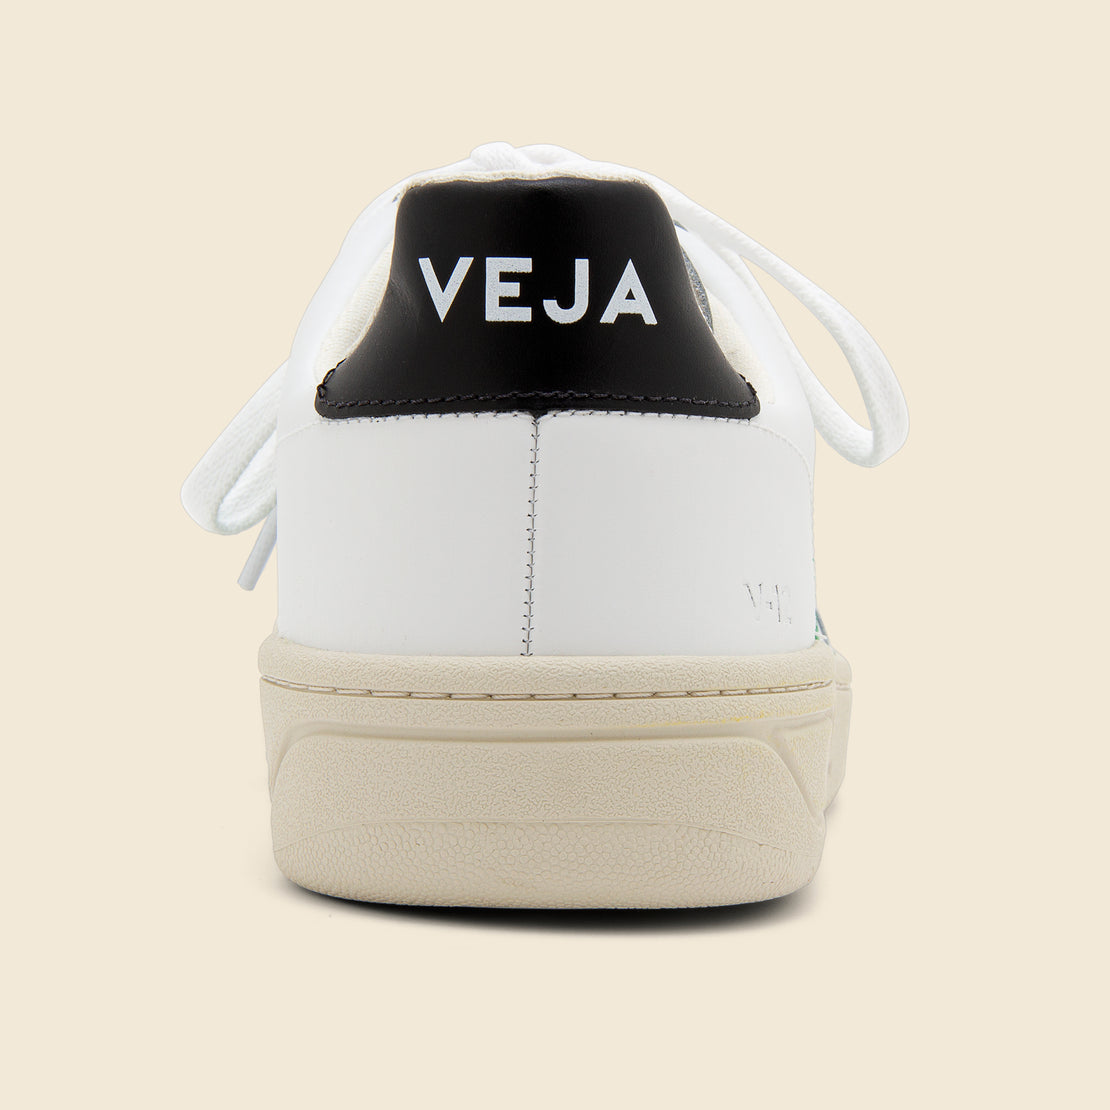 V-12 Leather Sneaker - Extra White/Emeraude Black - Veja - STAG Provisions - Shoes - Athletic